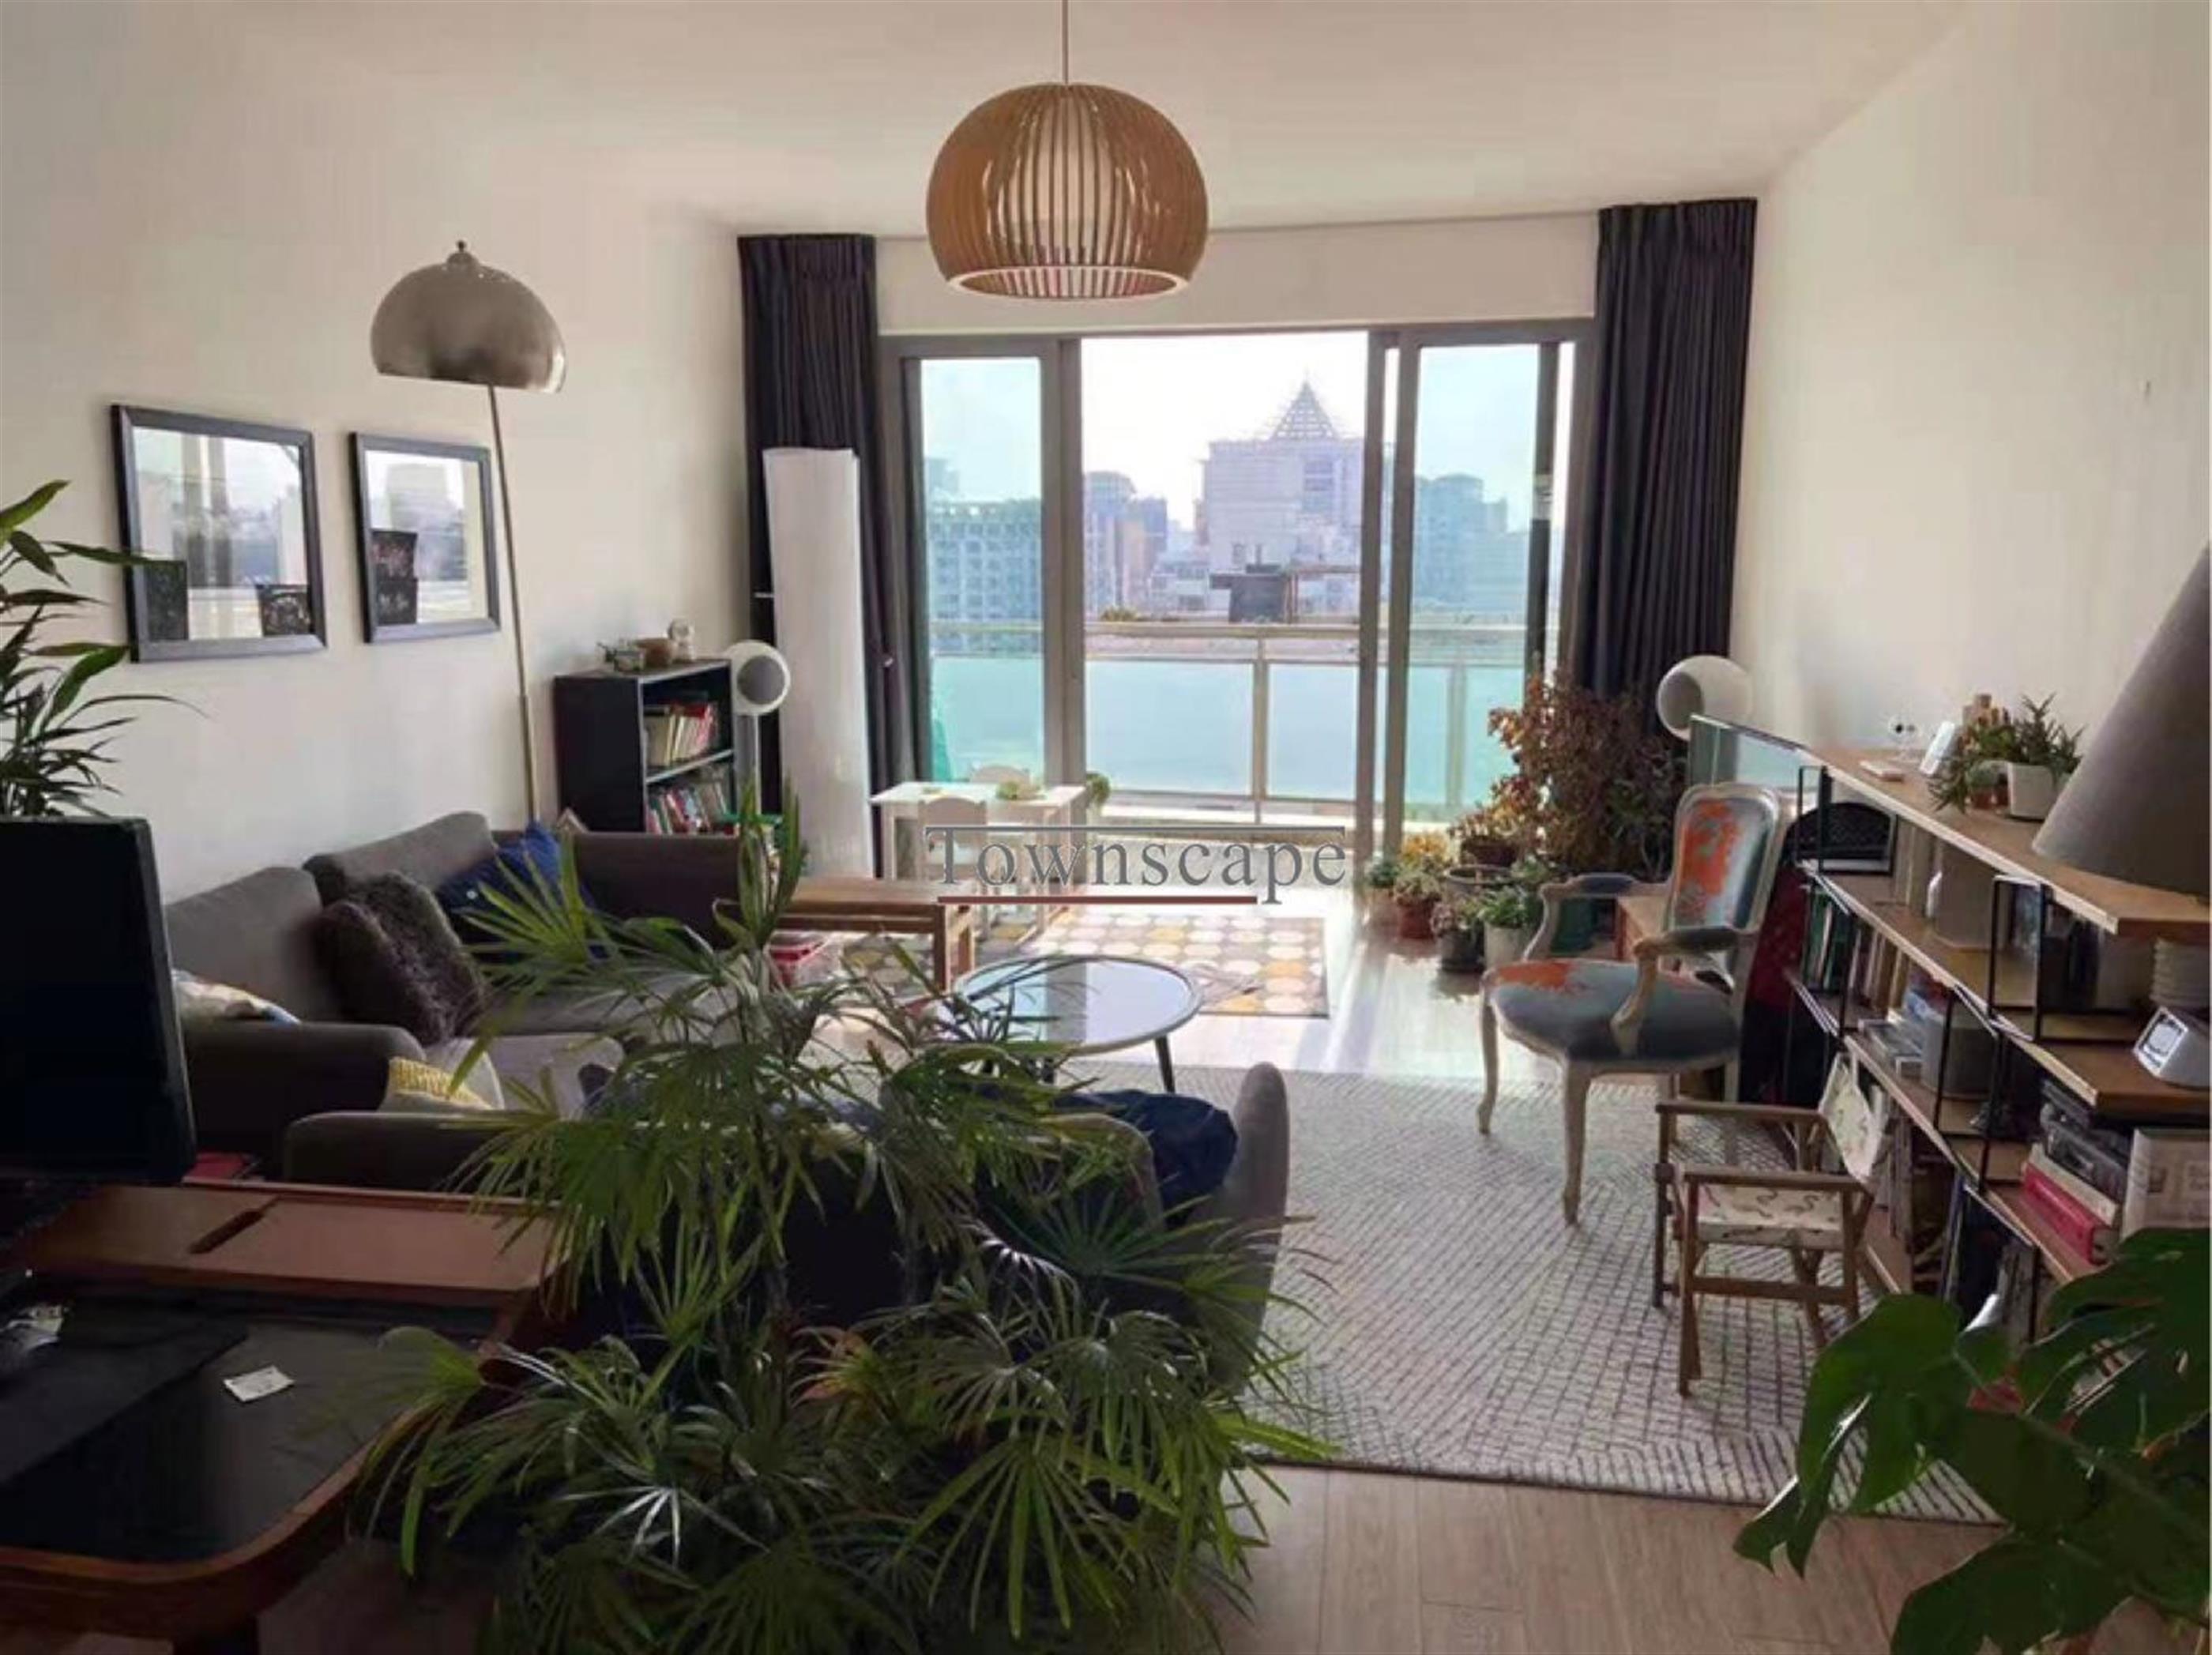 pretty decorations Fabulous Spacious Le Cite 3BR Apt in the Clouds Nr LN 1/9/11 for Rent in Shanghai’s Xujiahui